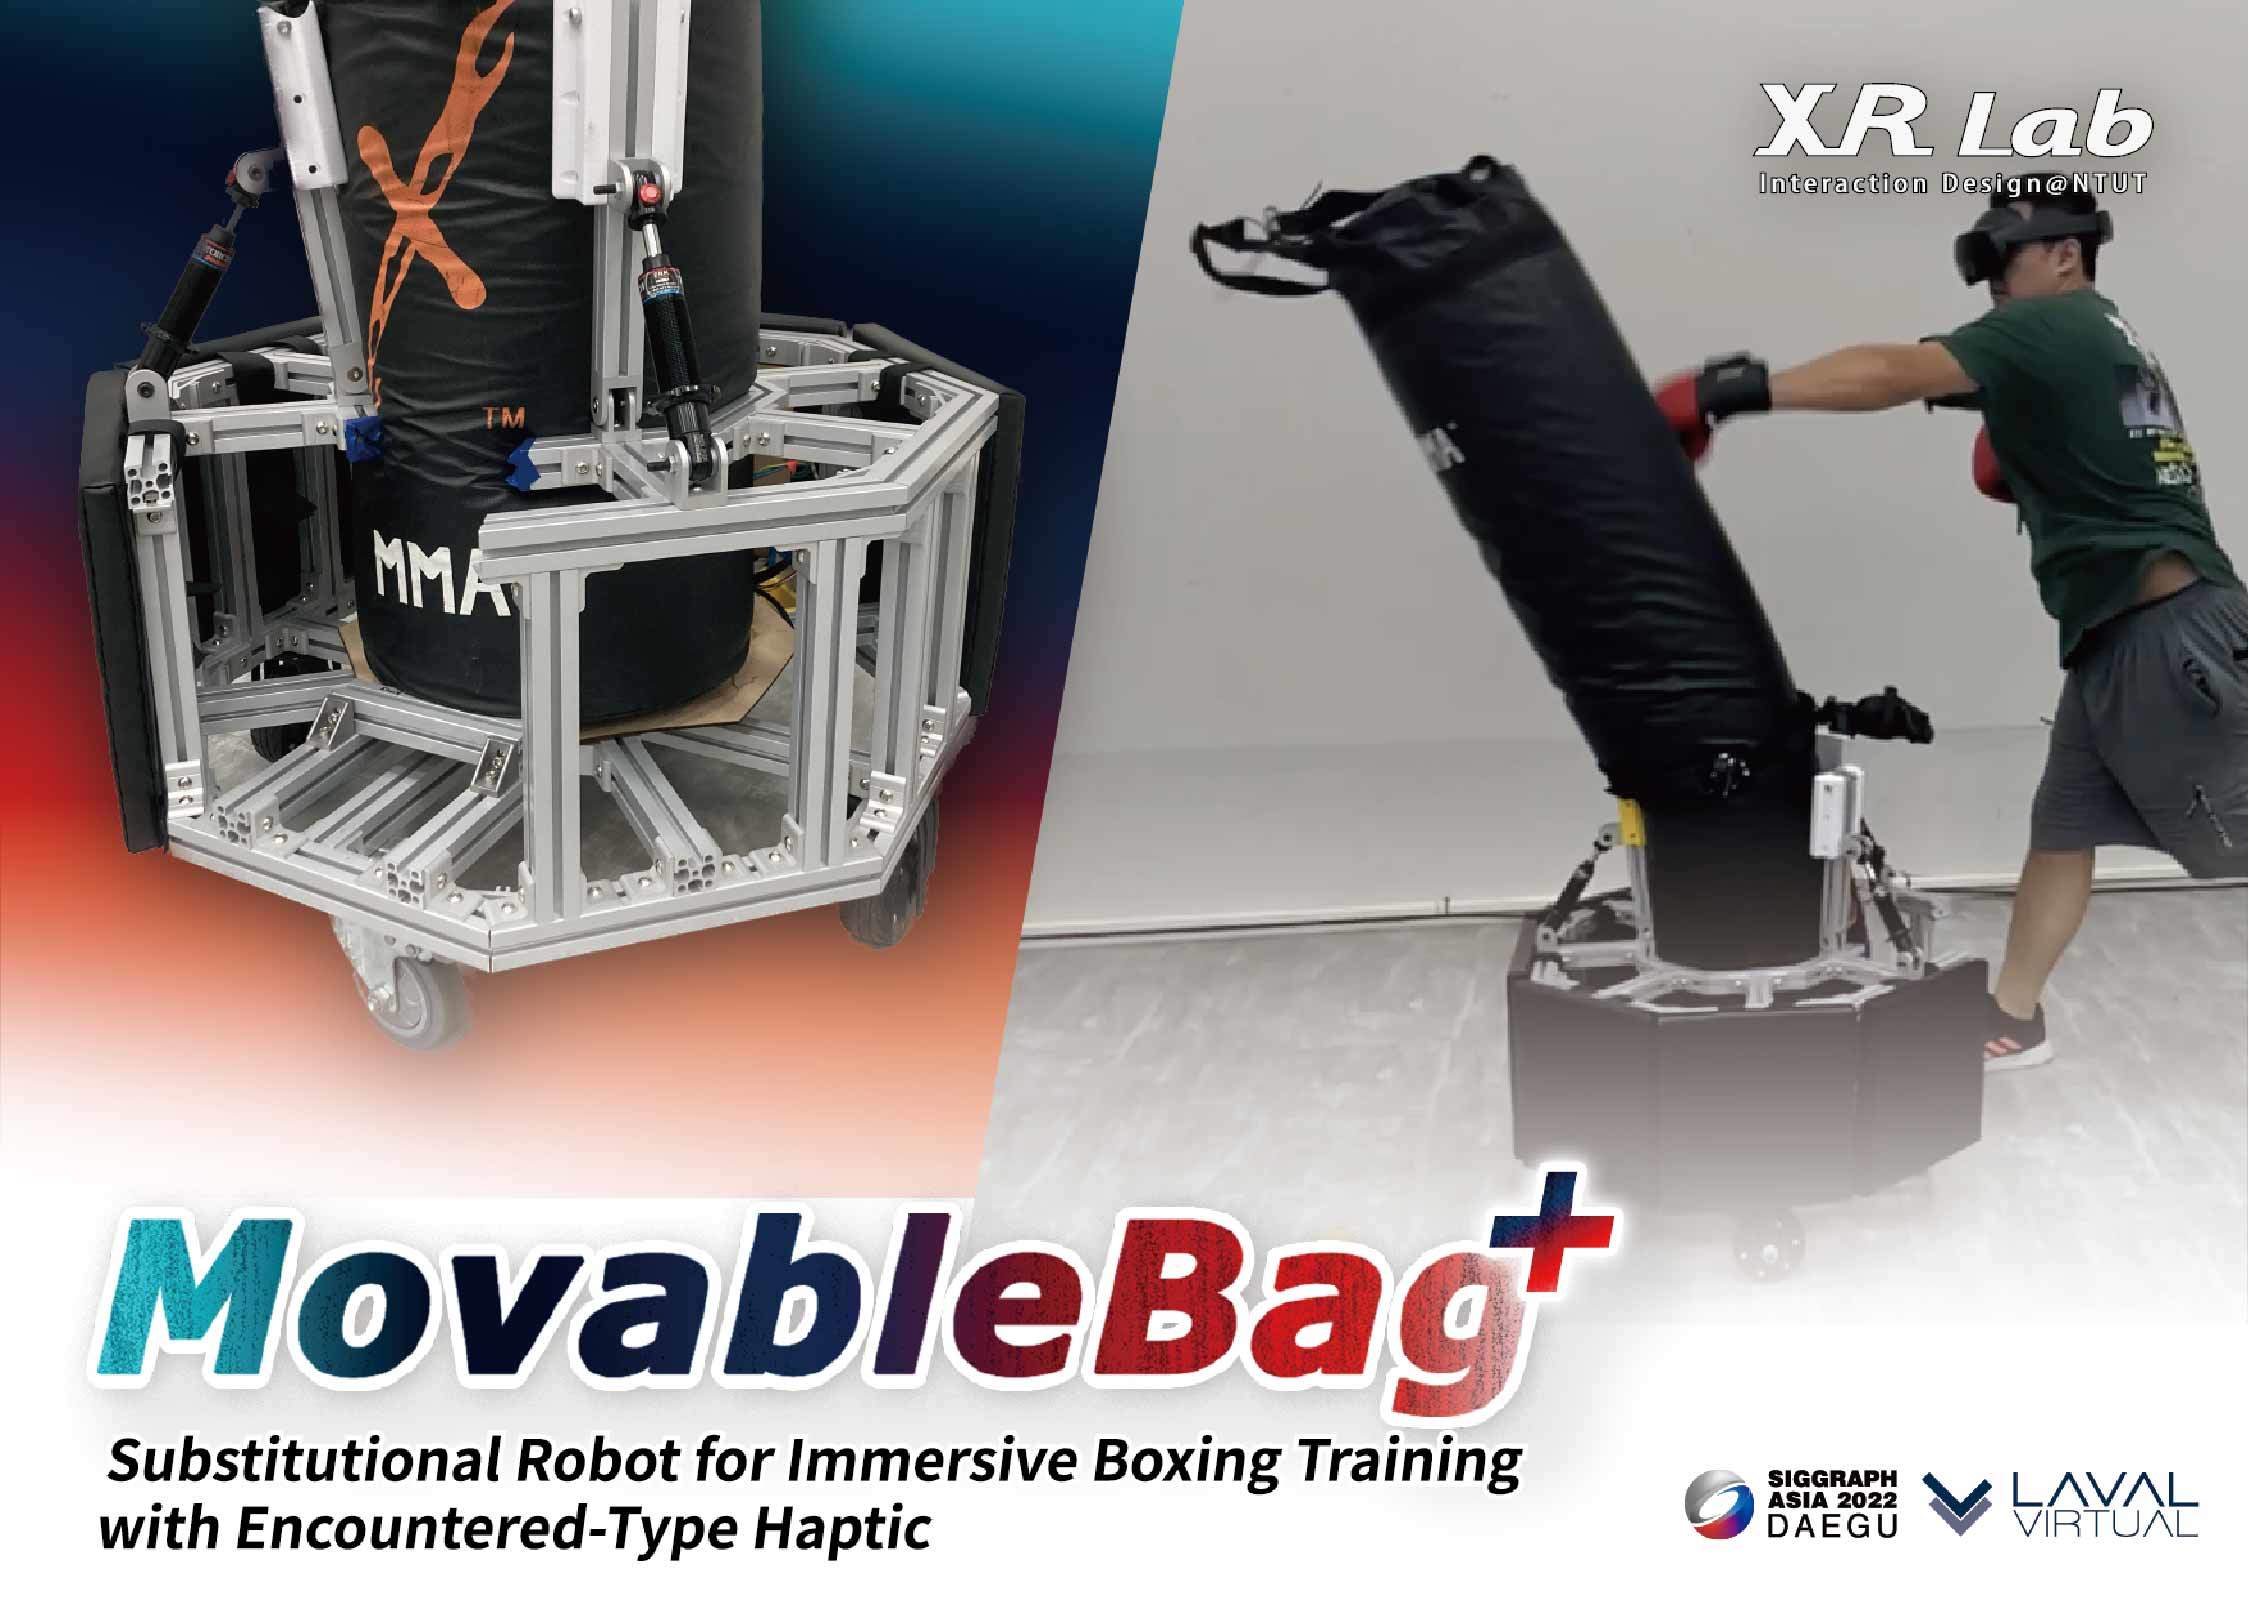 MovableBag+: Substitutional Robot for Immersive Boxing Training with Encountered-Type Haptic